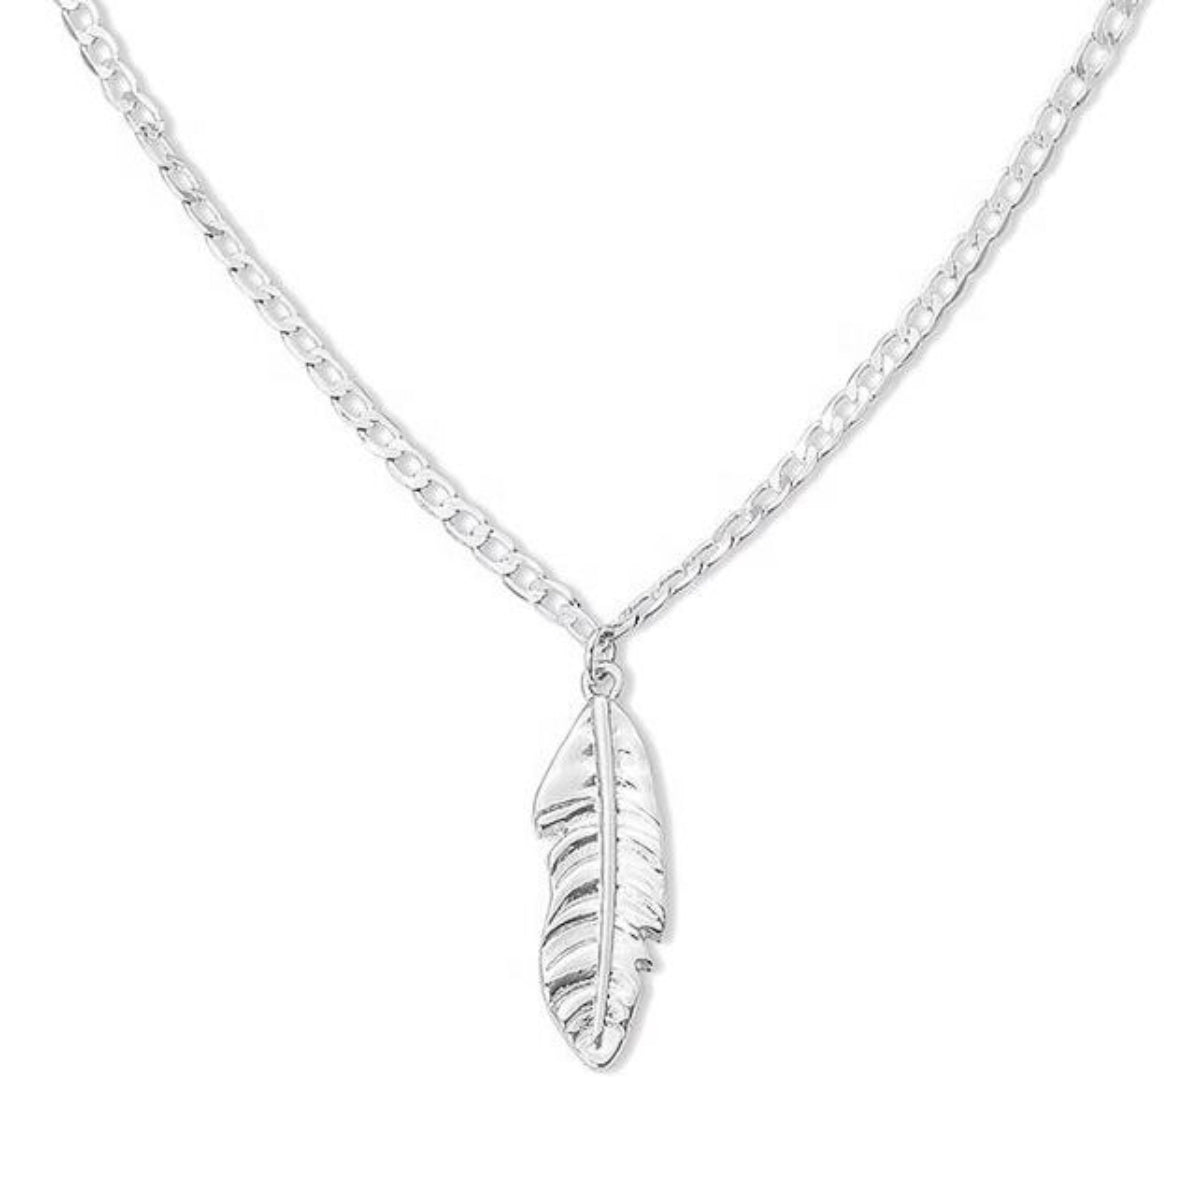 Featherly  feather cuban chain necklace in 925 sterling silver